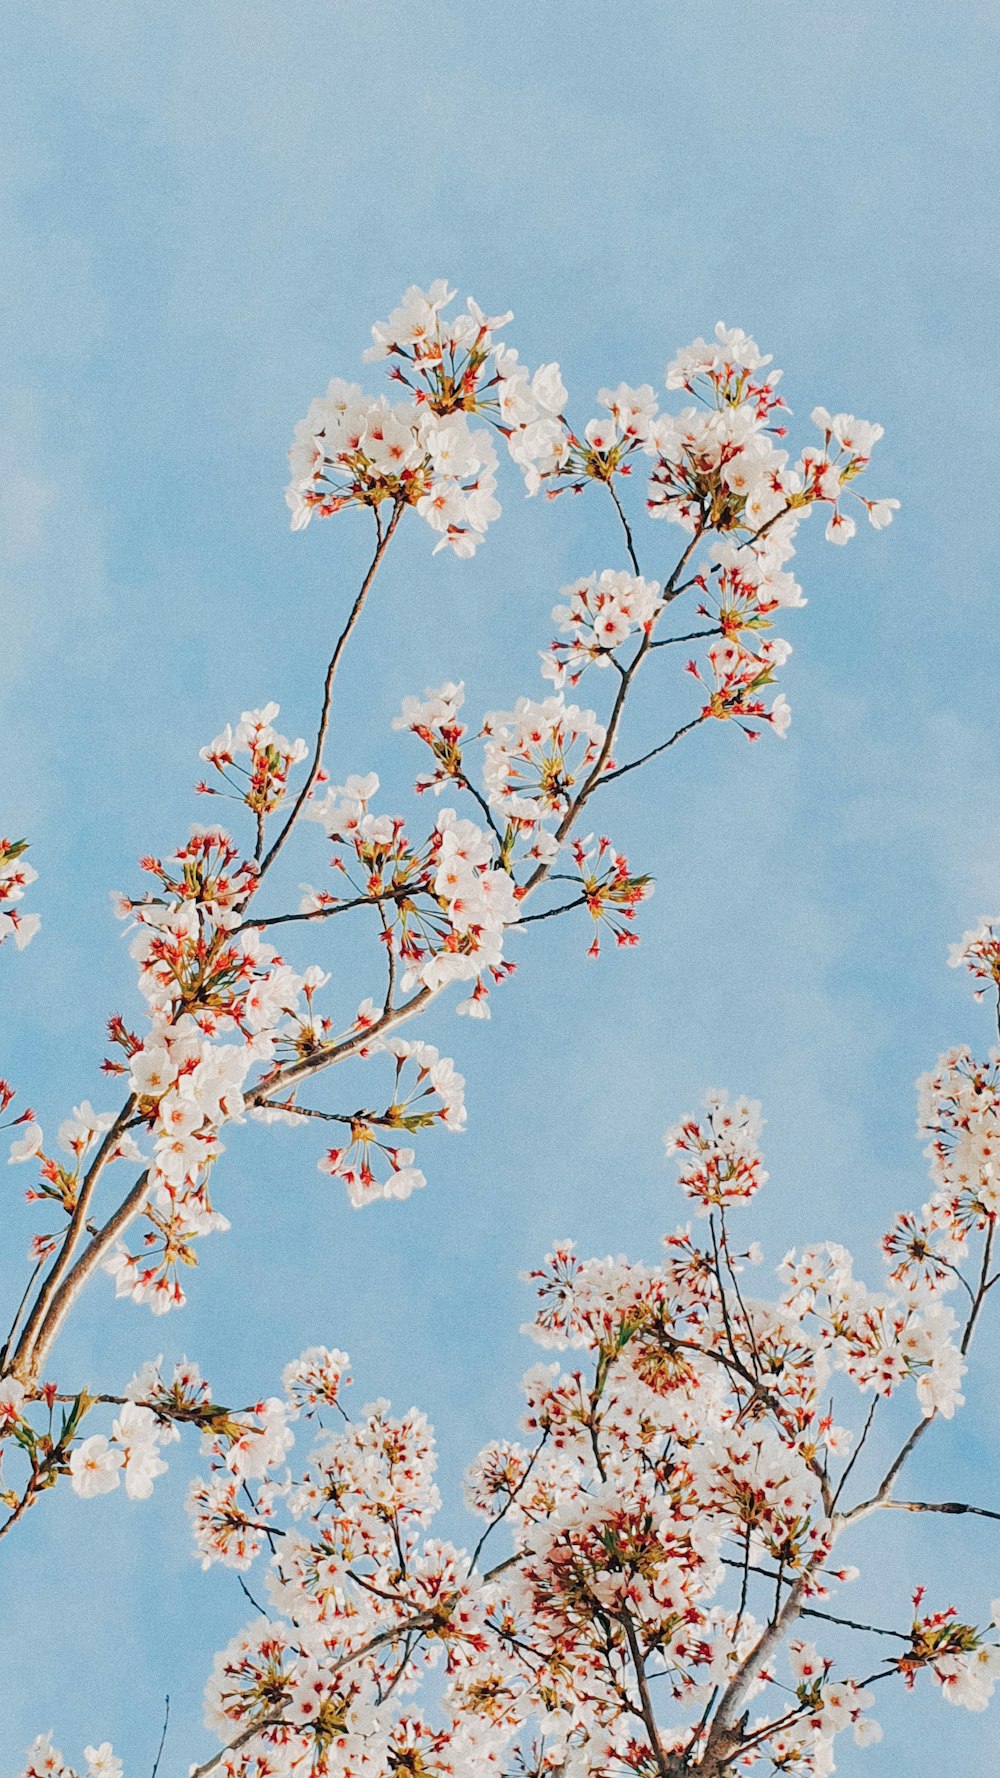 a tree branch with white flowers against a blue sky